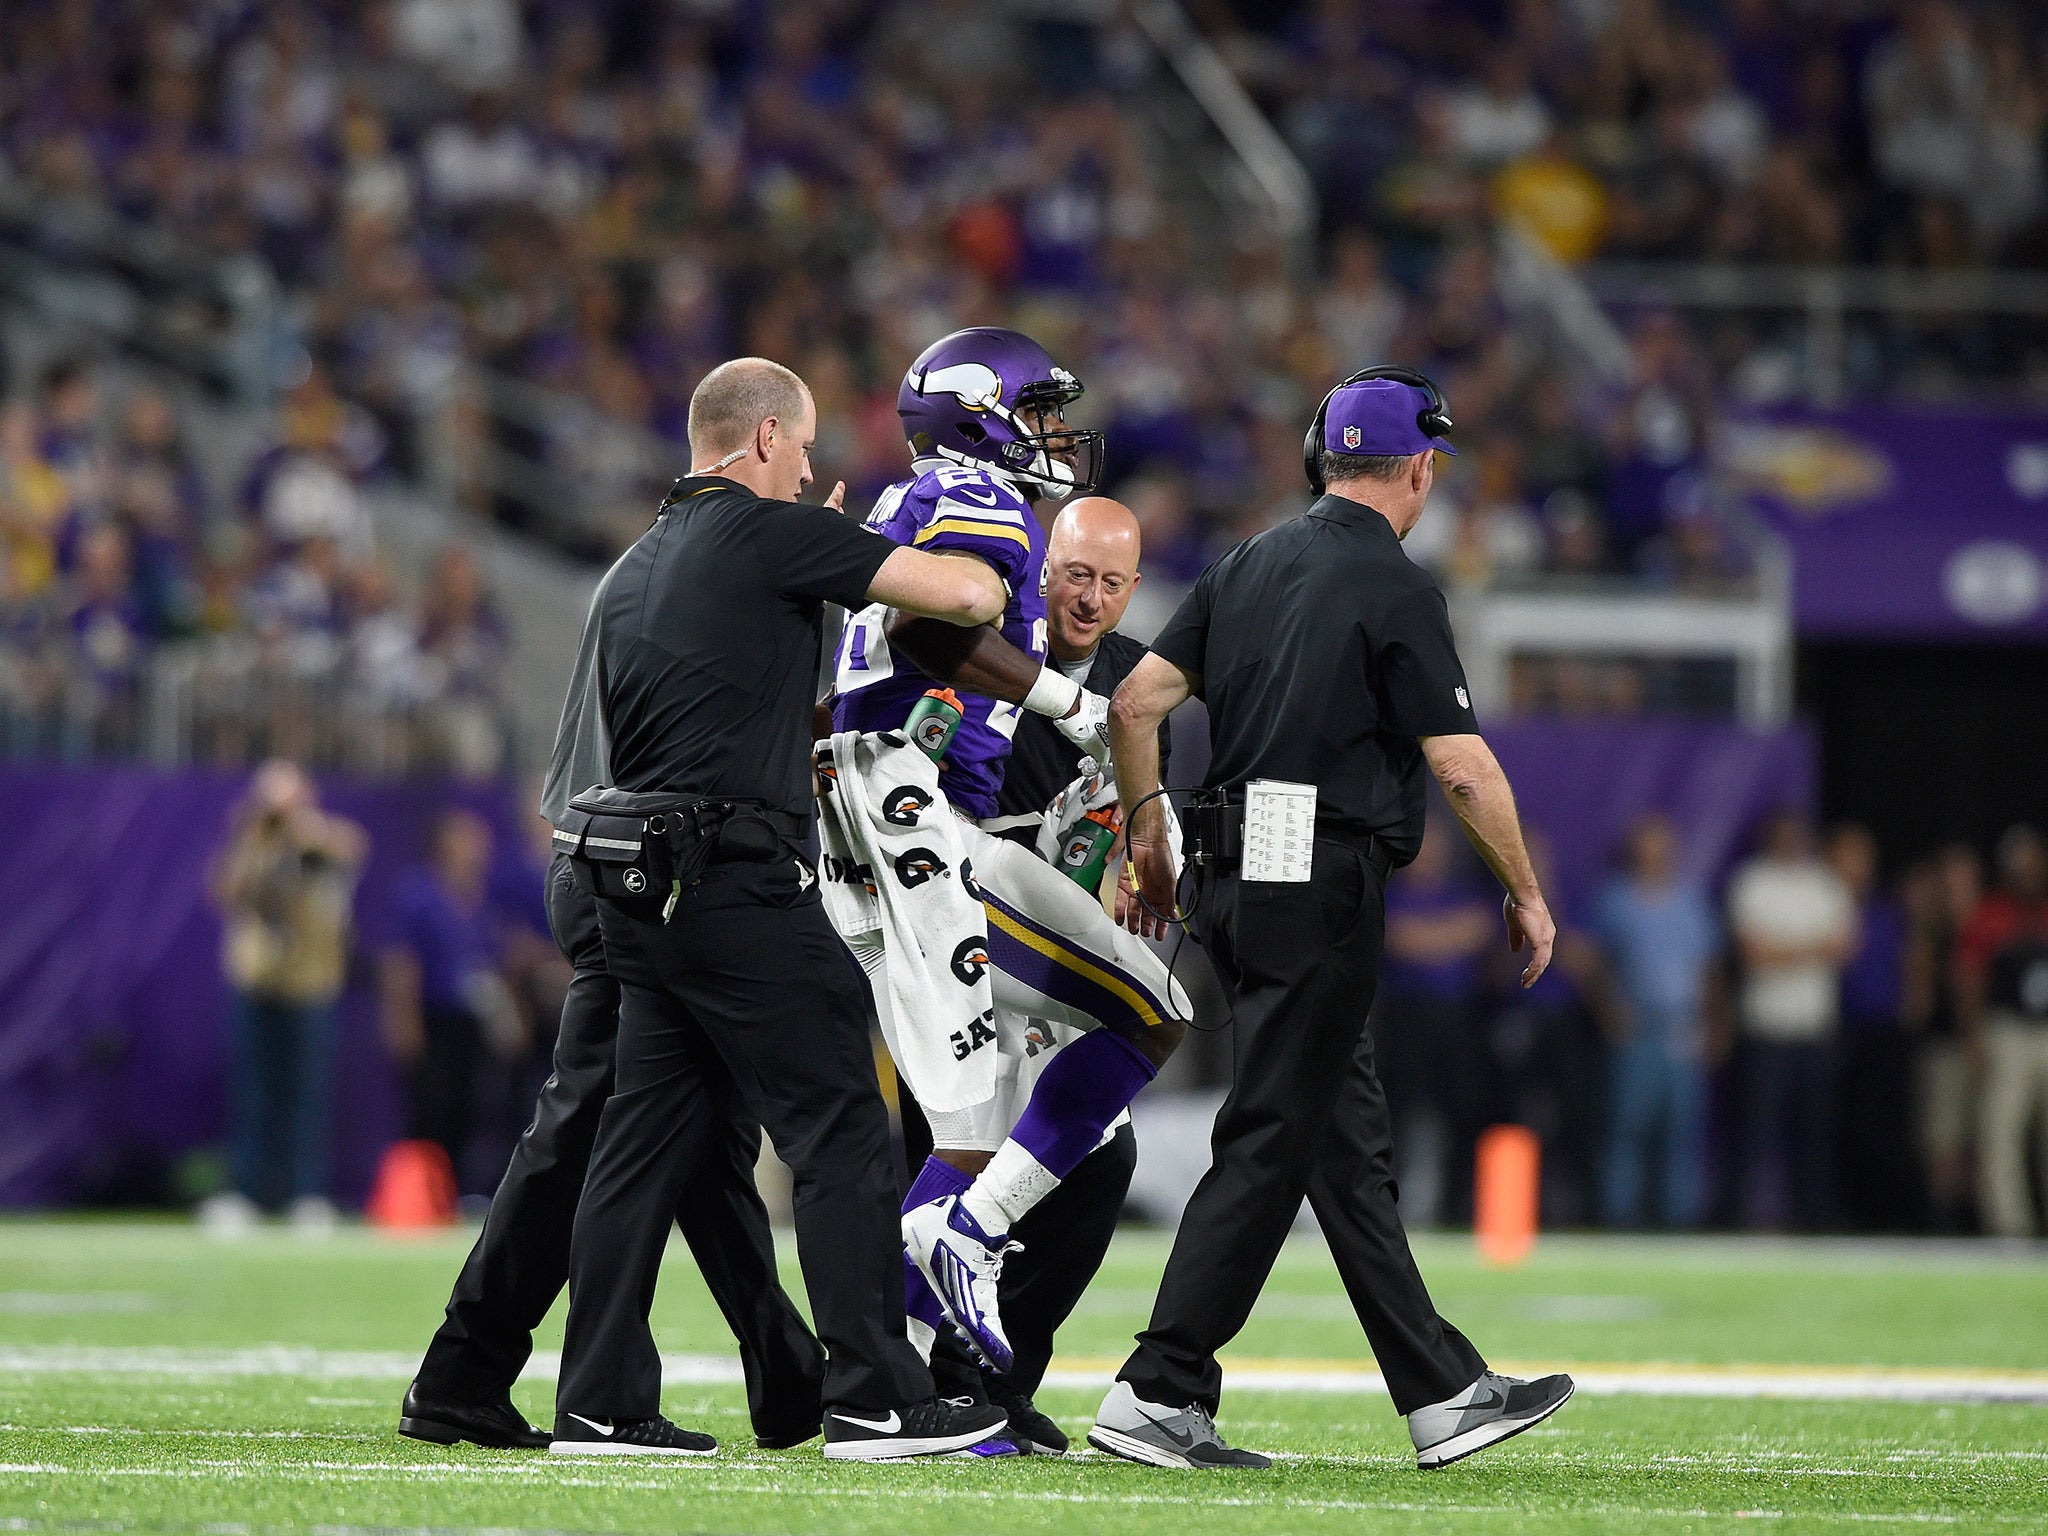 Adrian Peterson limps off the pitch with a knee injury